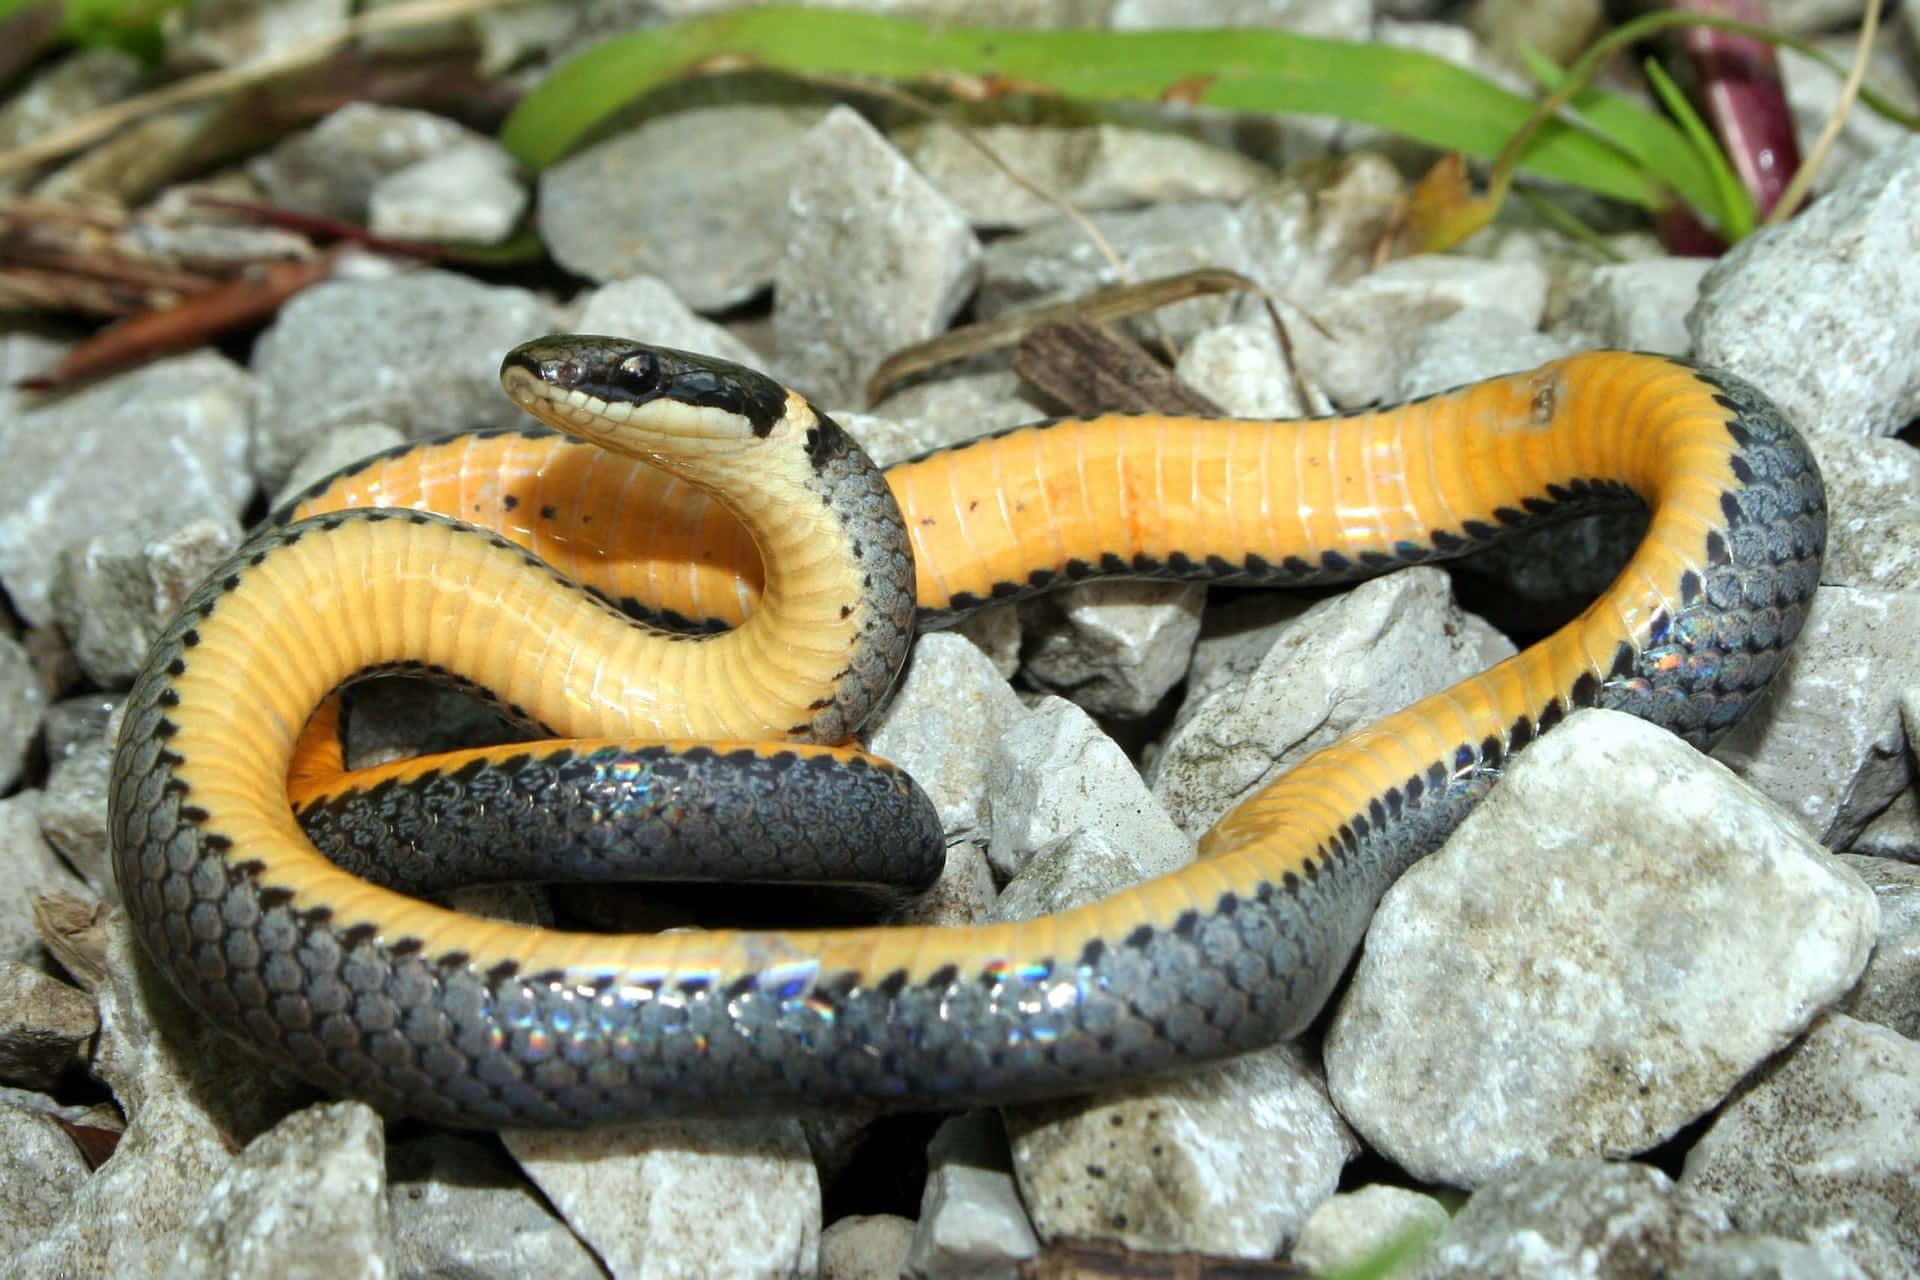 A Black And Yellow Snake On Rocks